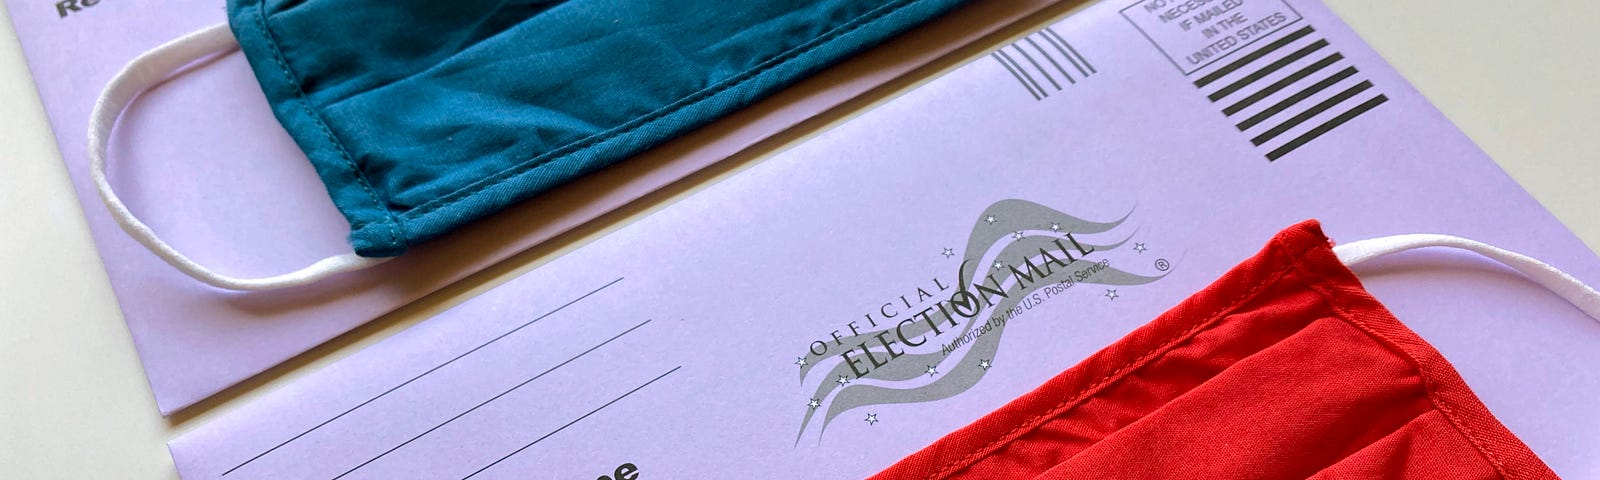 America’s voting experience in 2020 will be unlike any other in history. Ballots shown with masks on top of the envelopes.